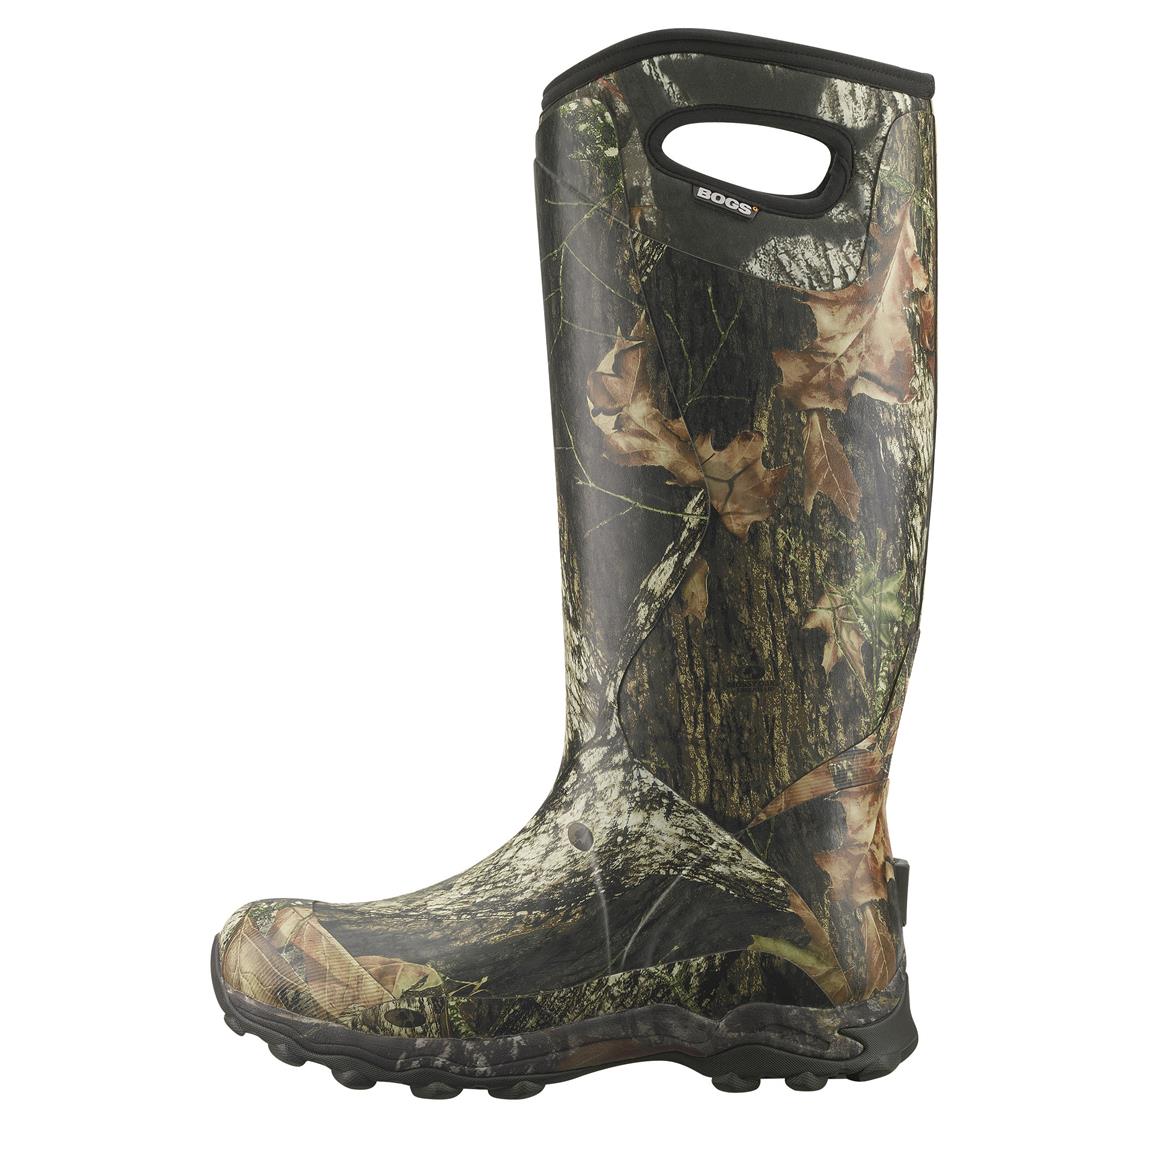 bogs hunting boots clearance